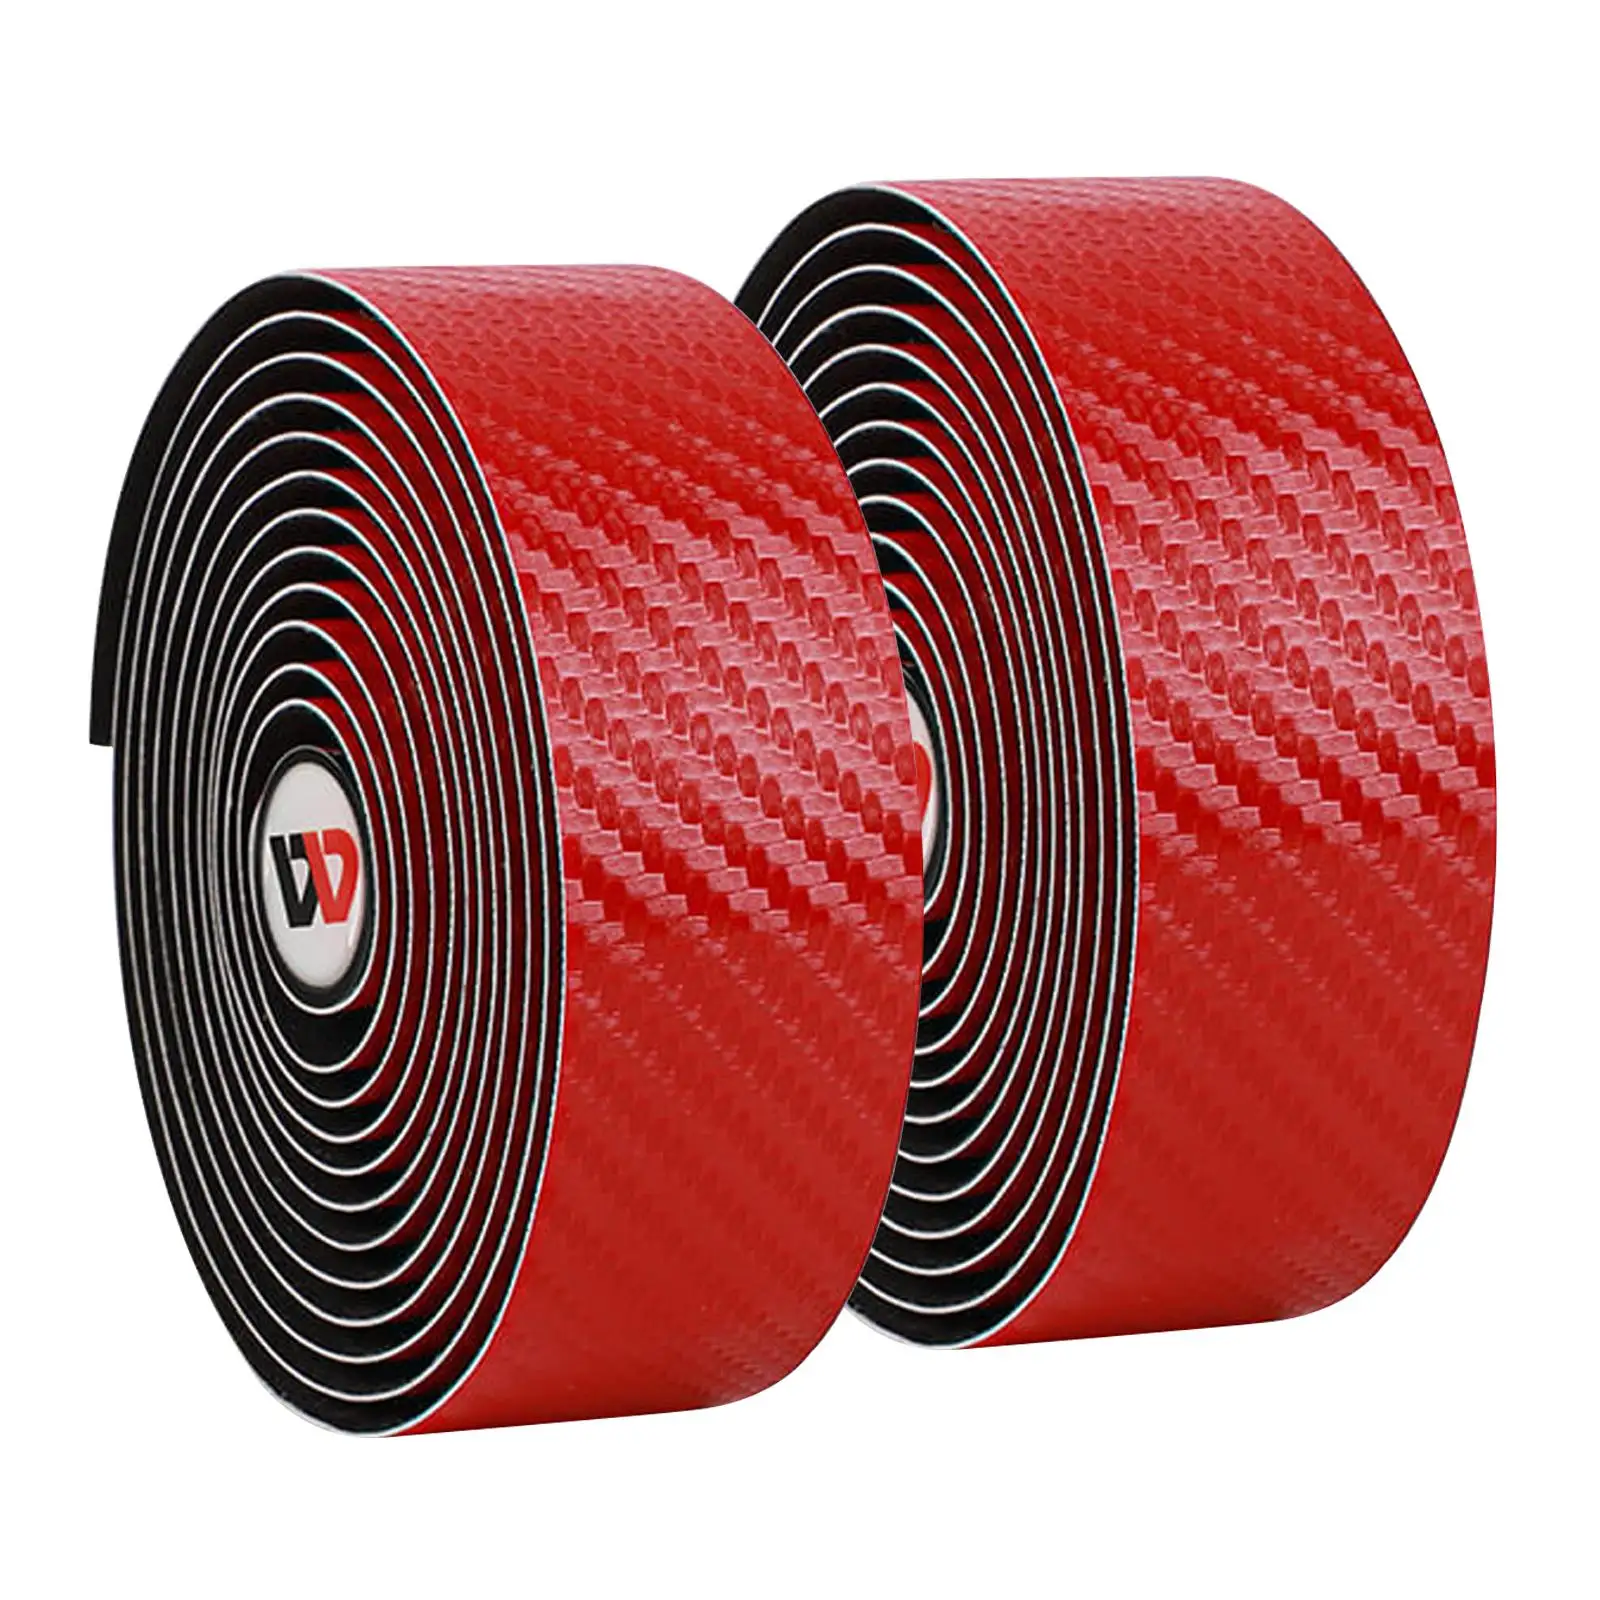 2x Damping Bike Handlebar Tapes Soft Safety Cycling Textured